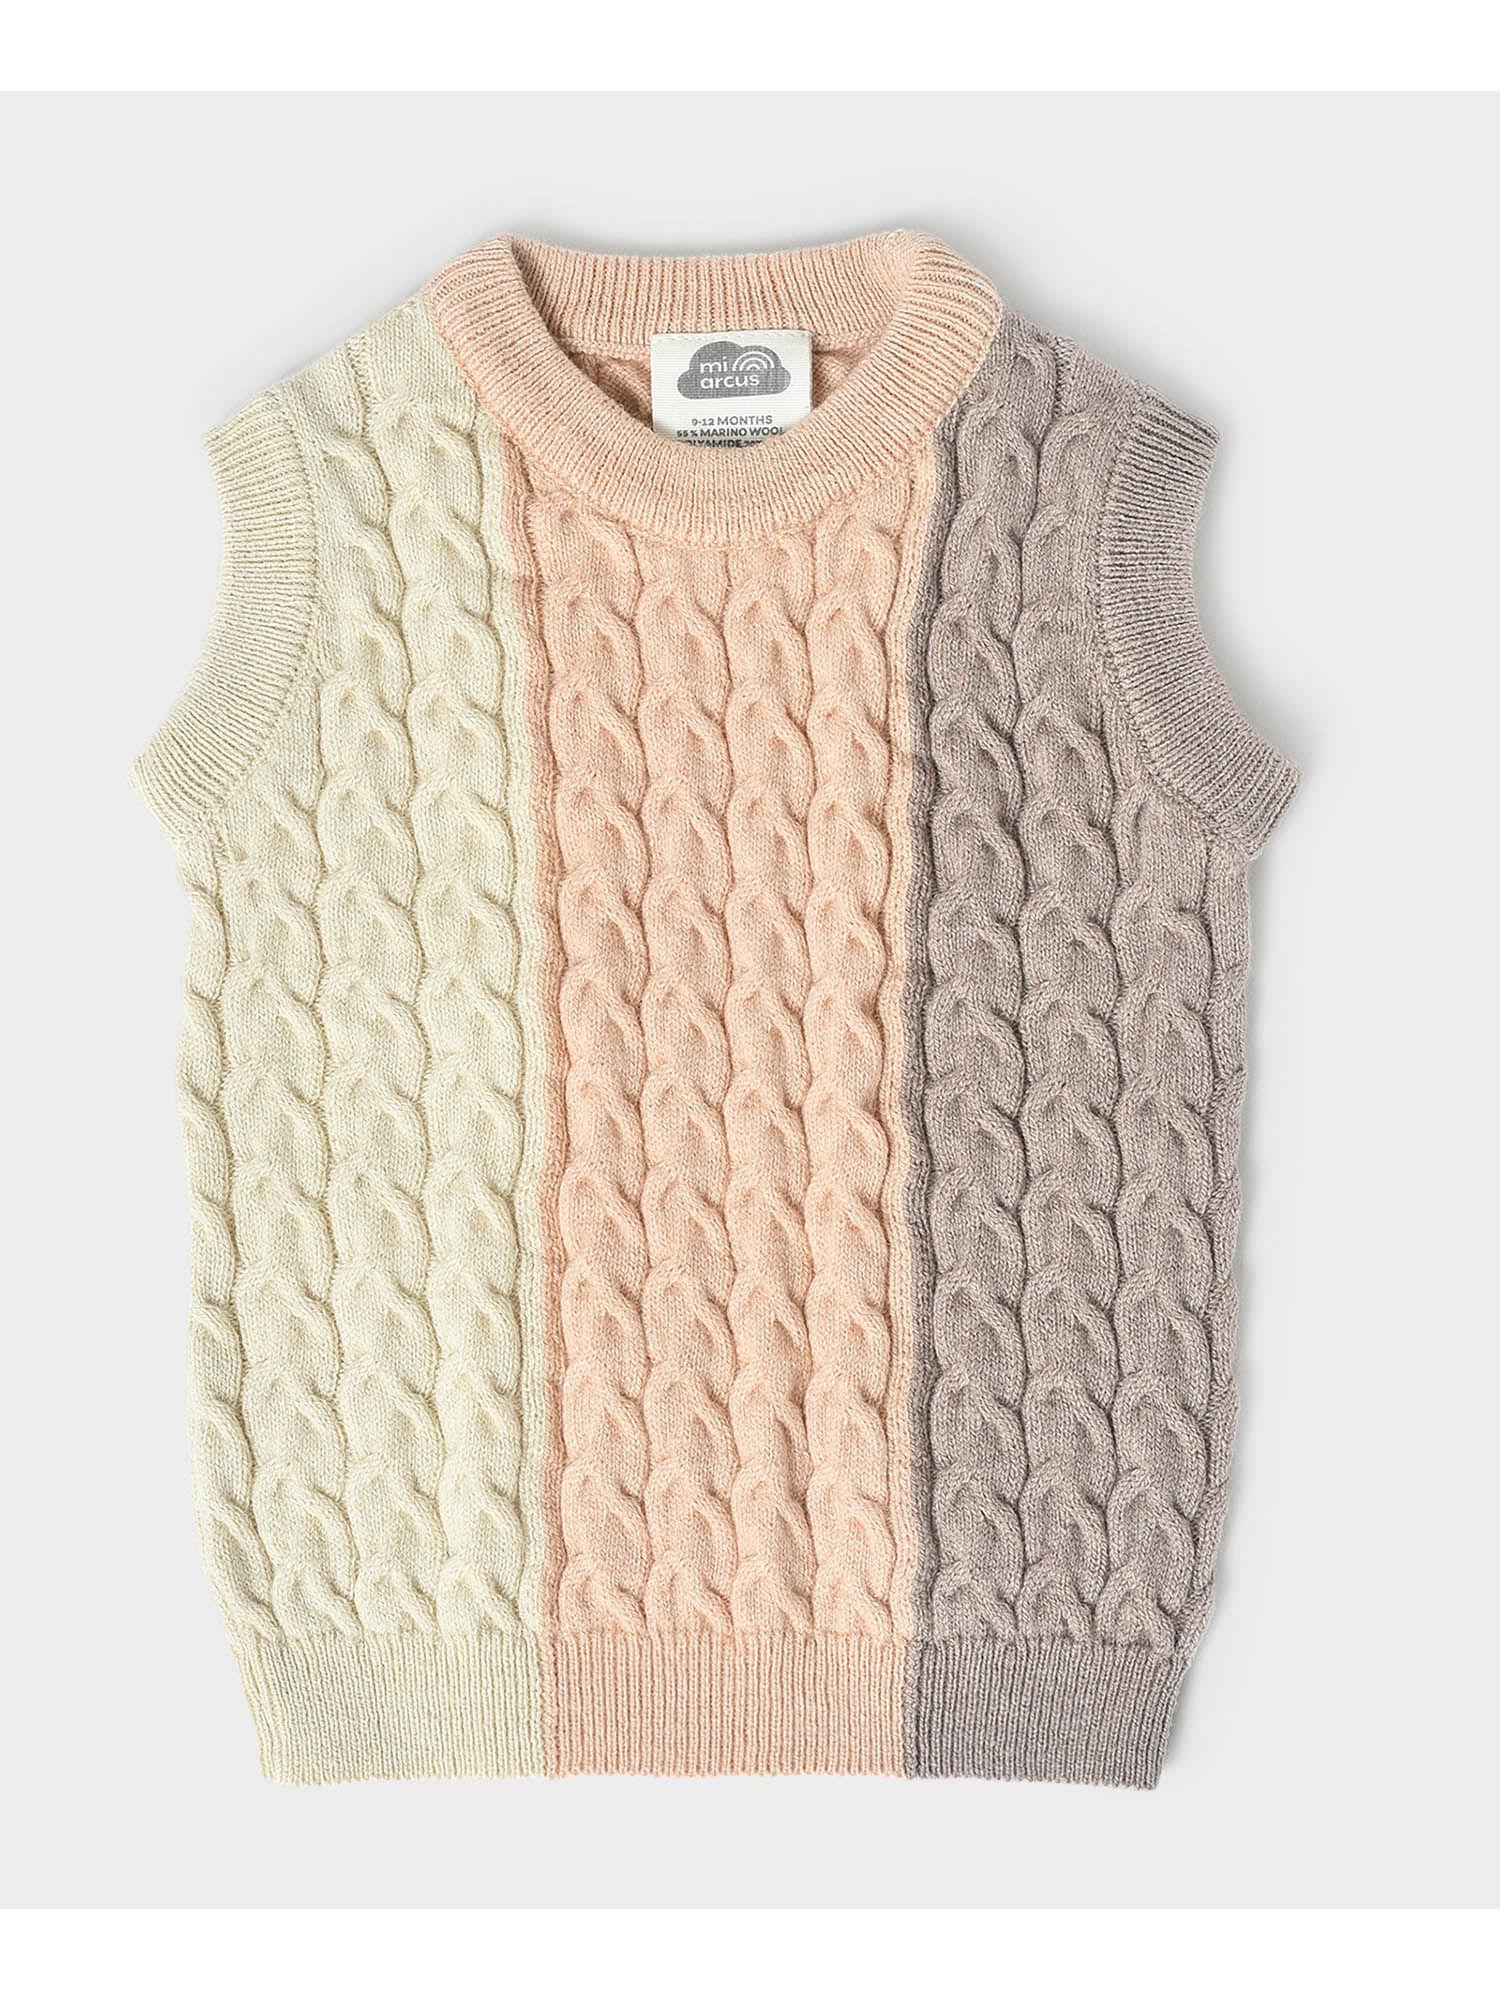 colorblock sleeveless sweater for kids